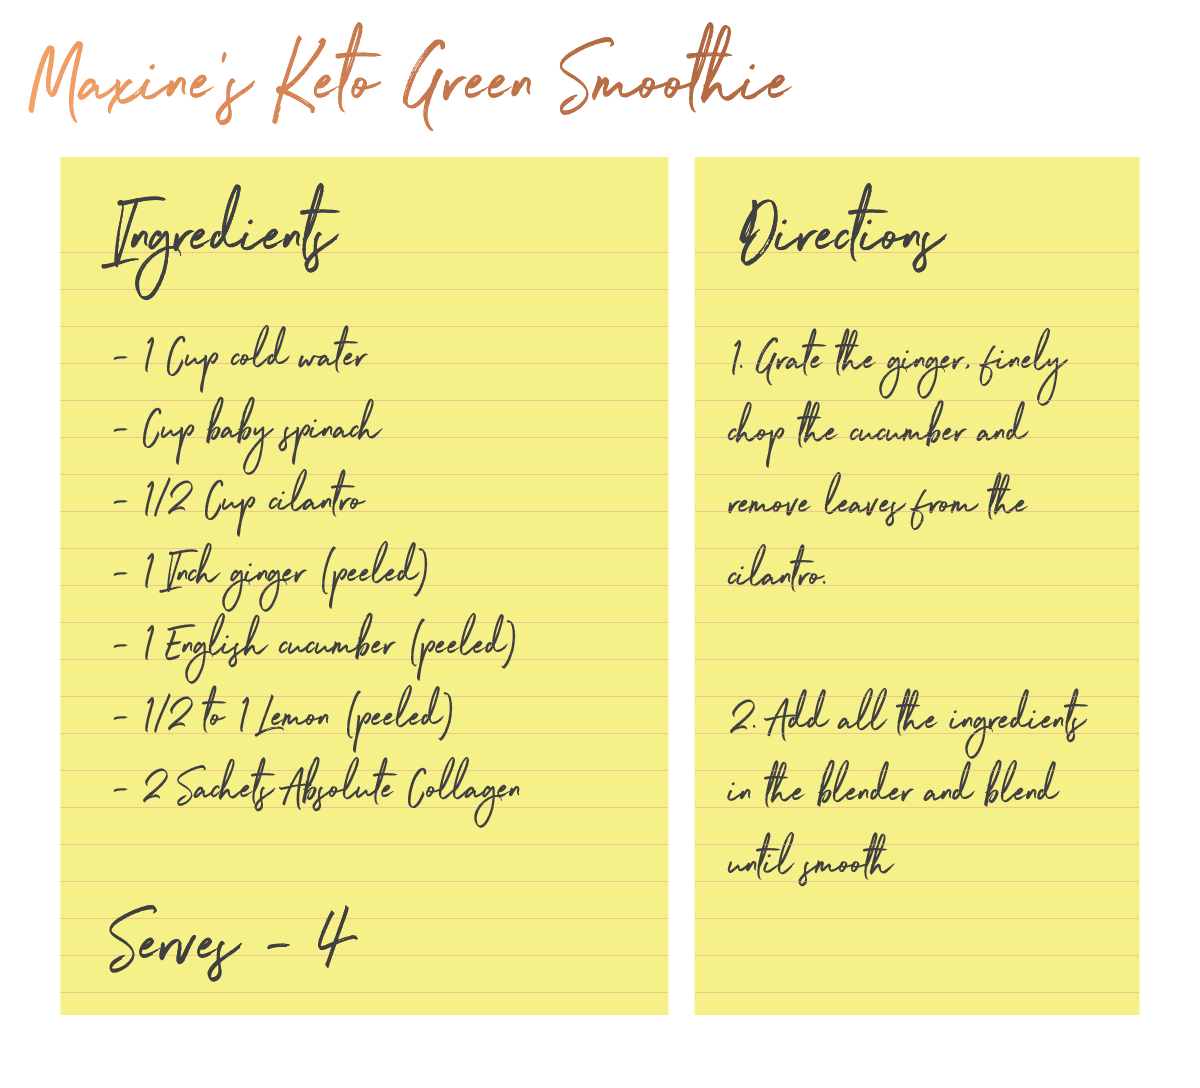 Image with cursive writing on yellow background showing a recipe for a keto collagen green smoothie